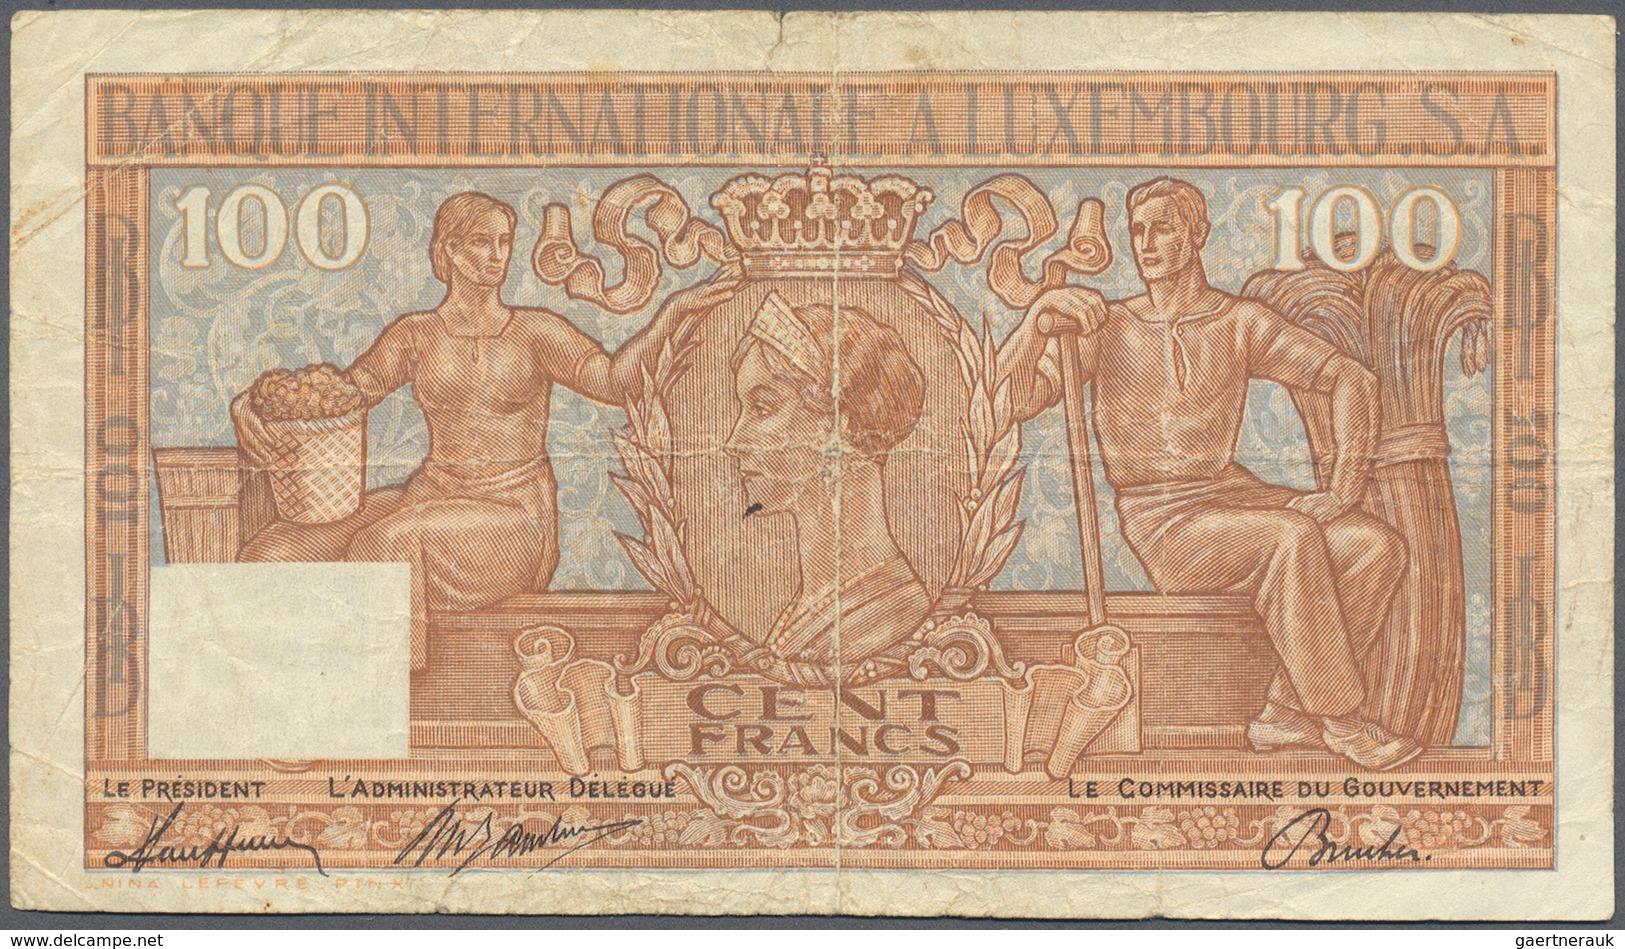 01934 Luxembourg: 100 Francs 1947 P. 12, Used With Several Folds, Some Softness In Paper, A Center Hole, 5 - Luxembourg